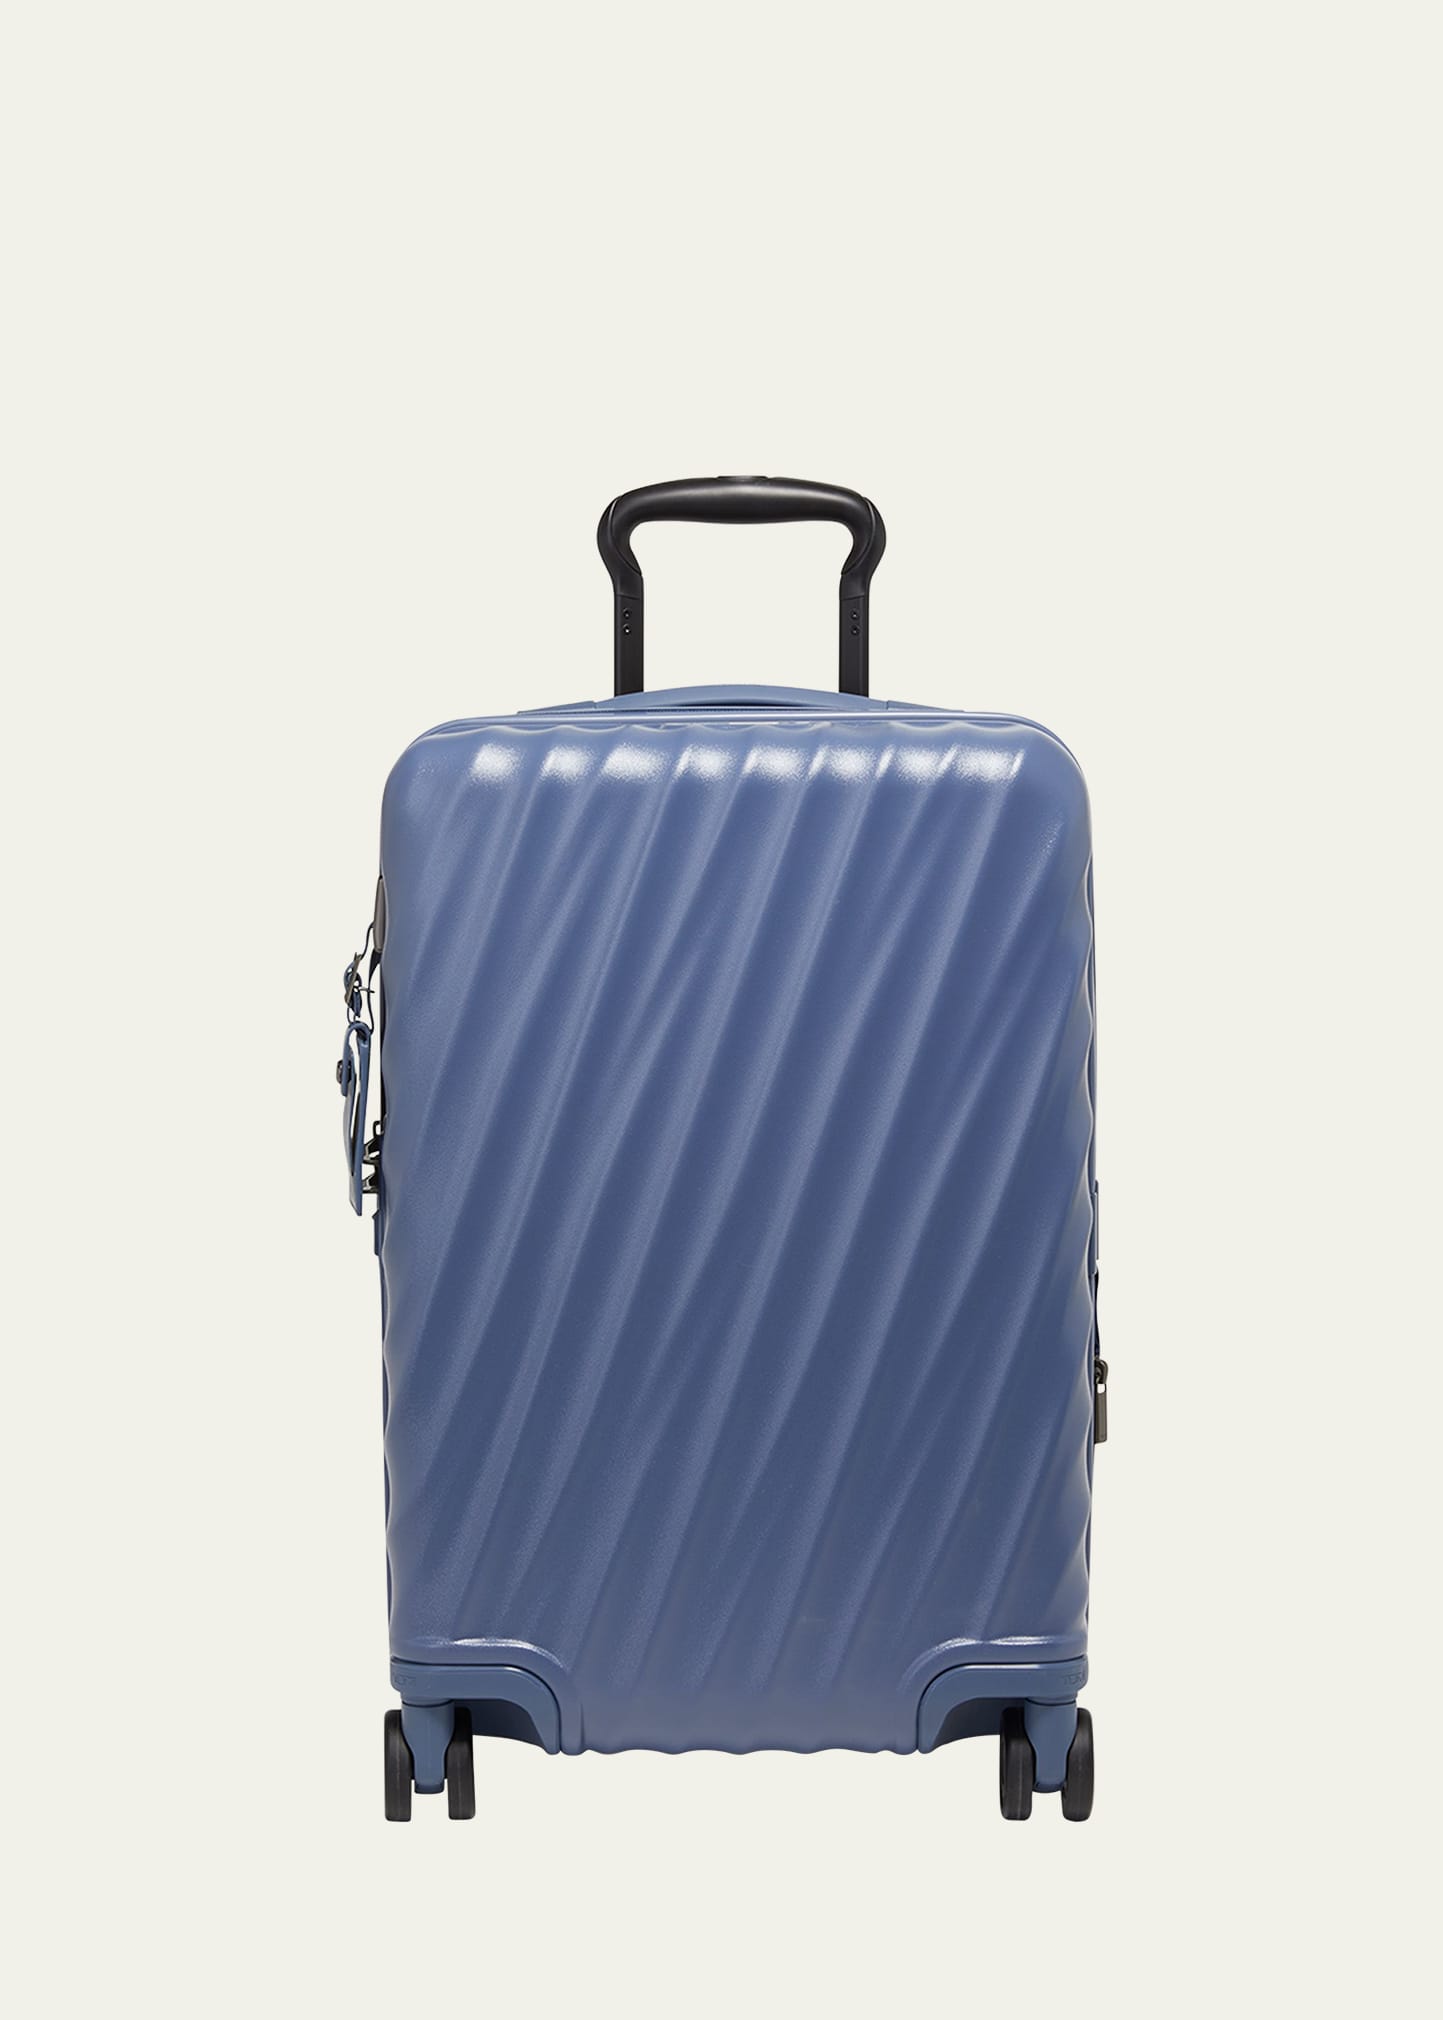 Shop Tumi International Expandable 4-wheel Carry On Luggage In Slate Blue Textur